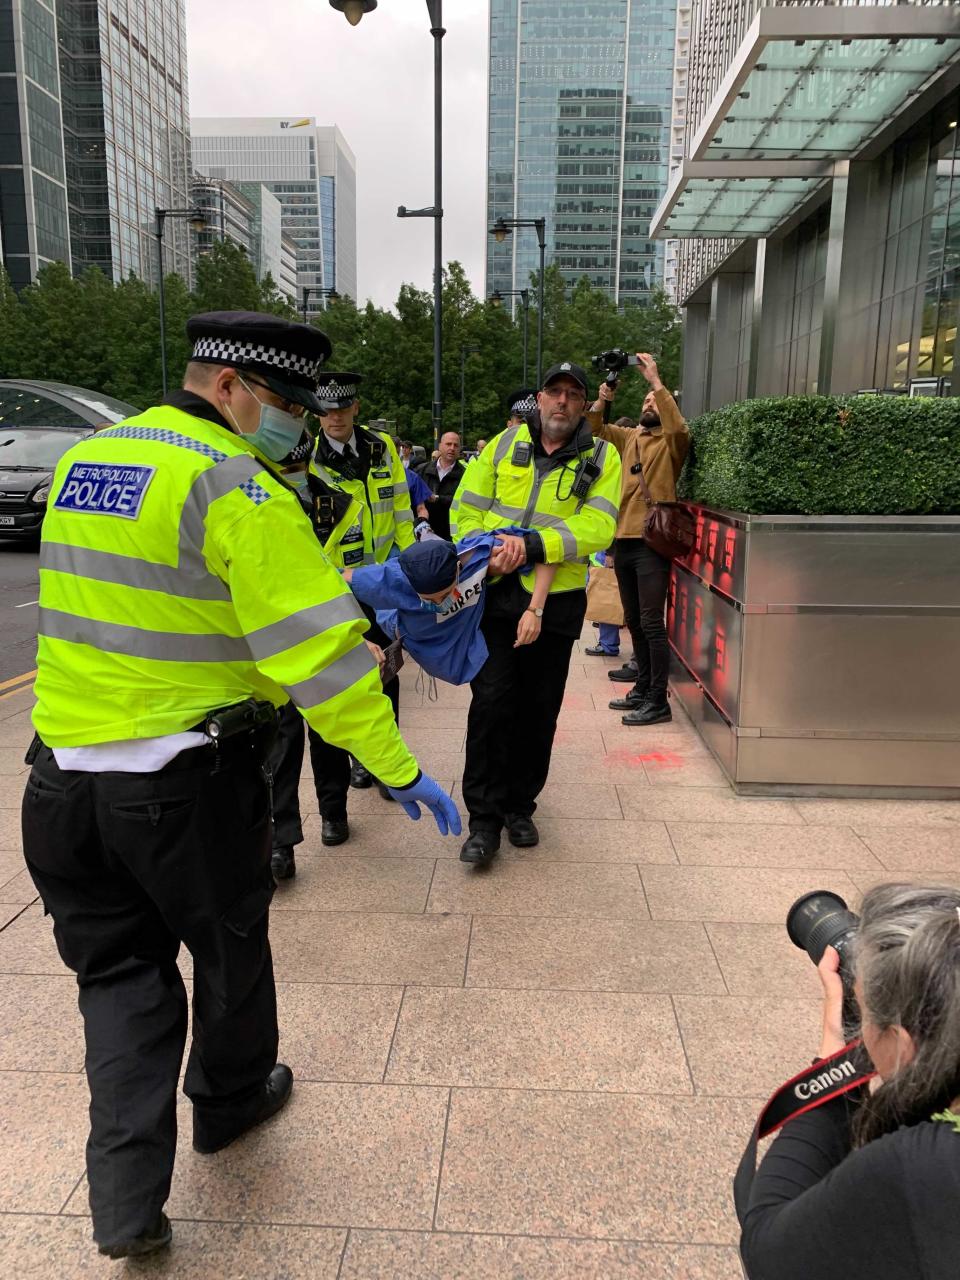 Police carry a protester away (The Independent)